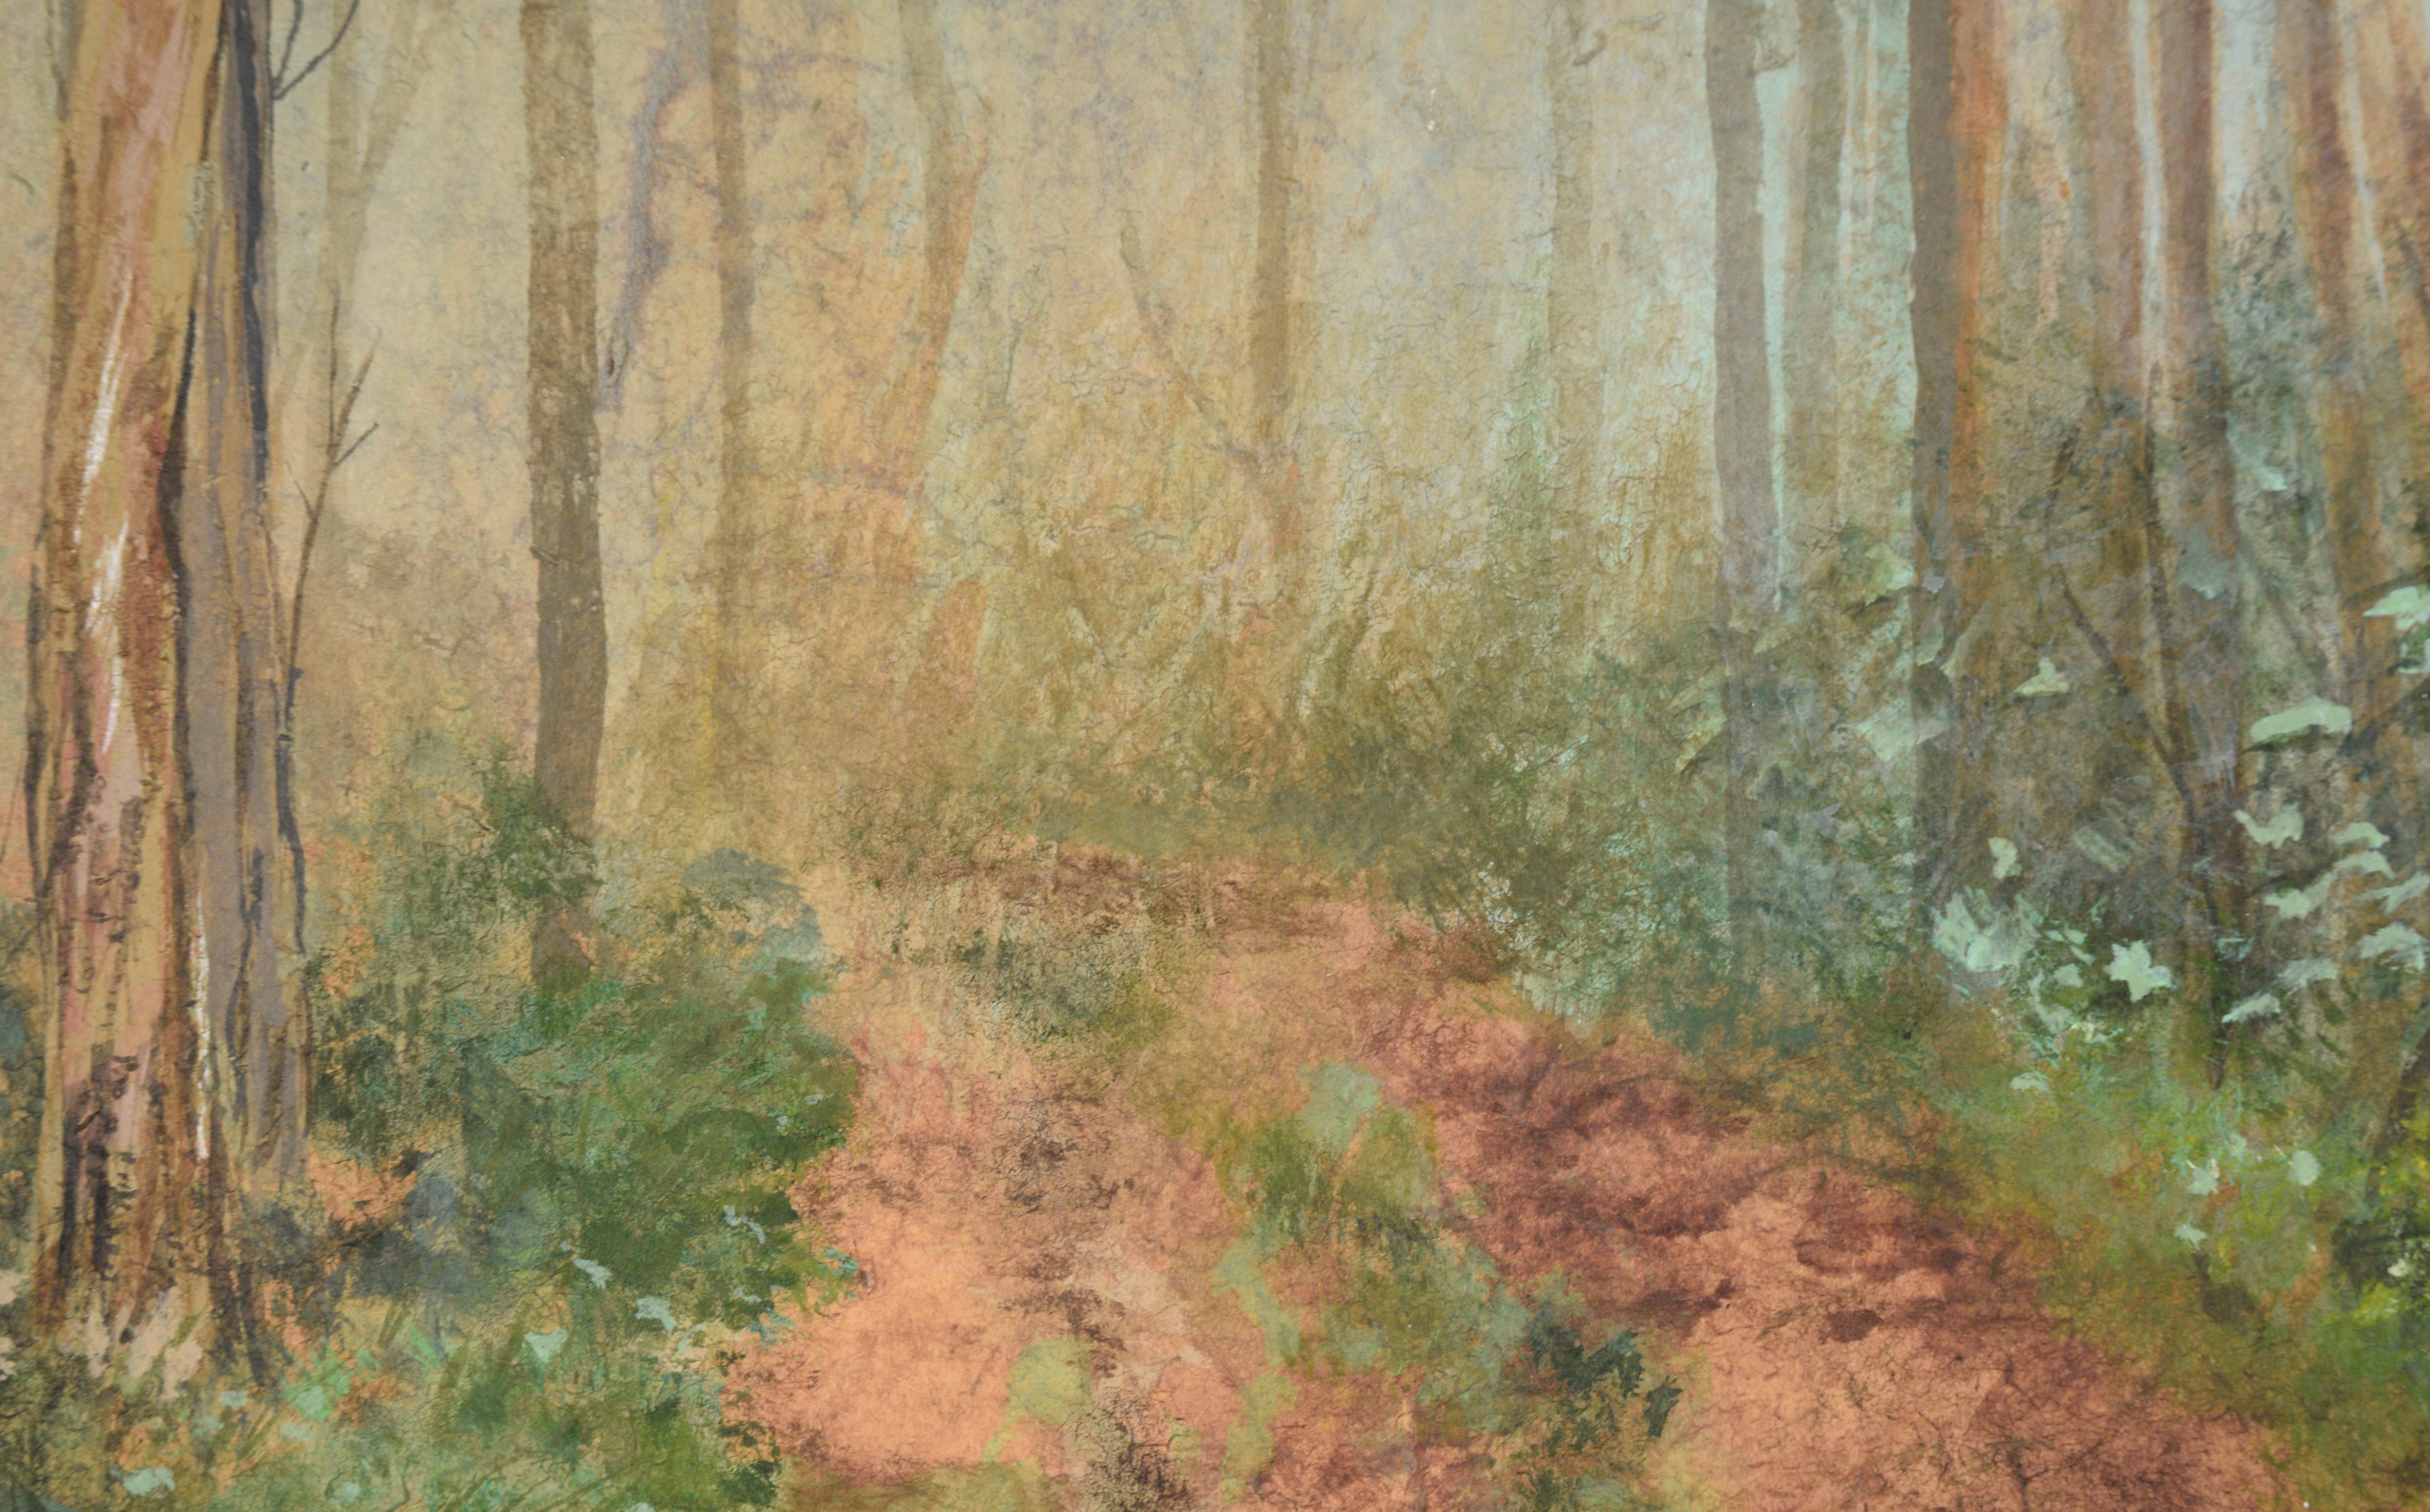 A beautiful, atmospheric forest scene by American artist Gary Hicks (American, 20th Century), c.1970's. A small trail invites the viewer into this misty forest landscape, where layers of trees dissipate into the distance. 

Signed 